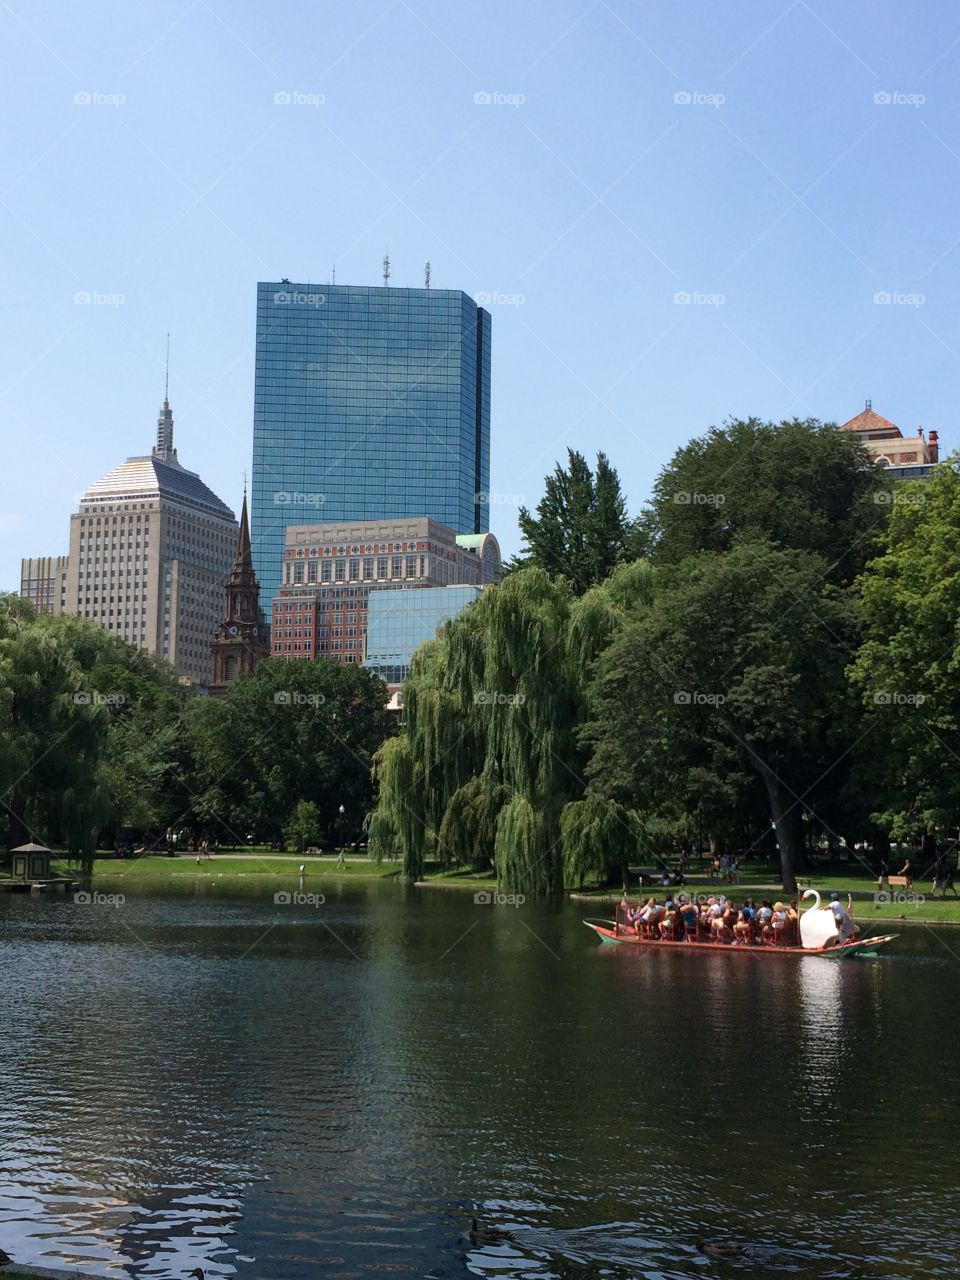 Boston Public Gardens. Summer in Boston at the Public Gardens with Swan Boats and Skyline